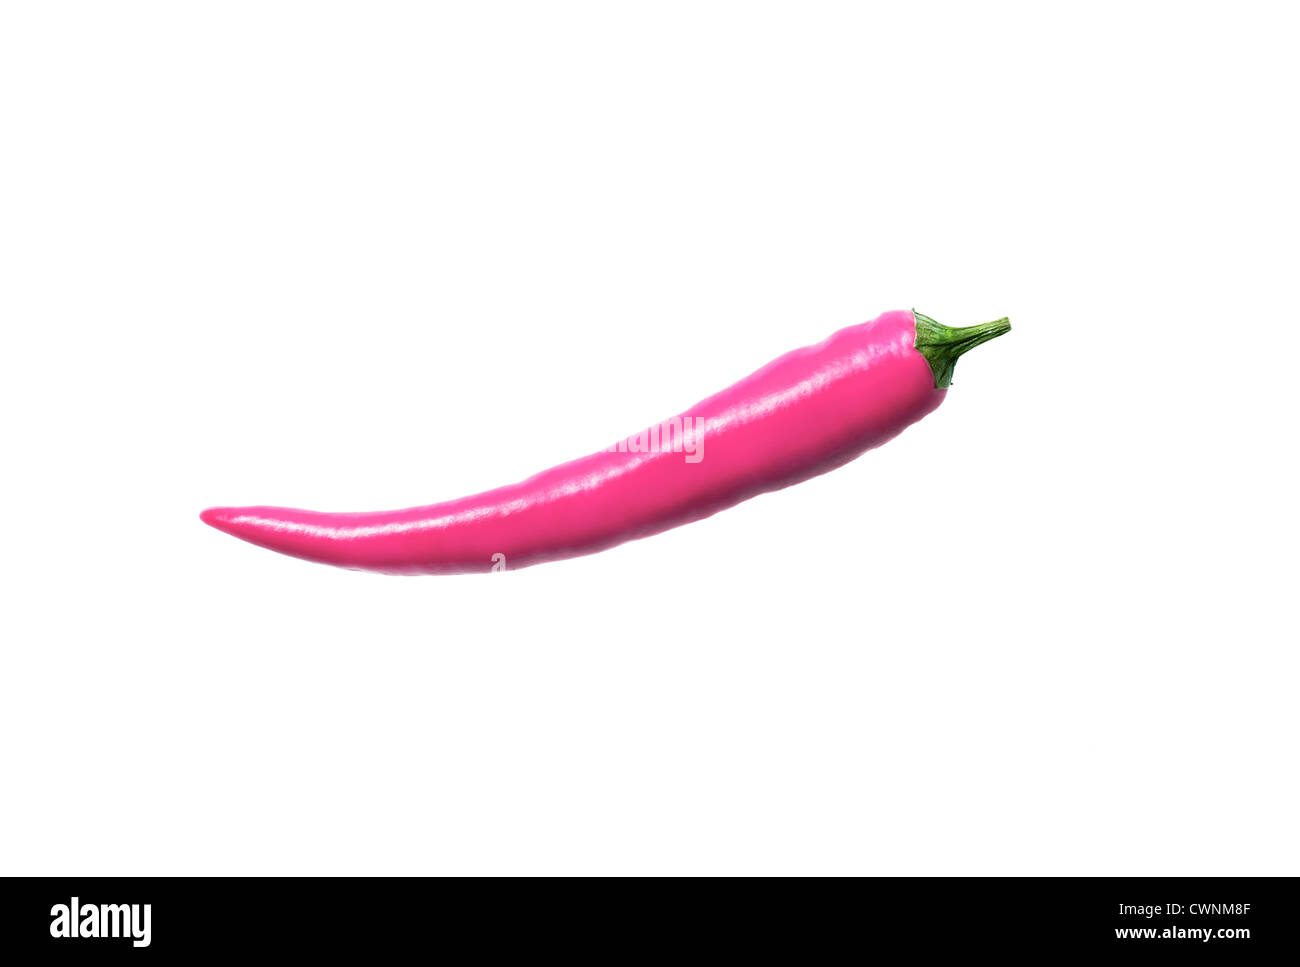 Pink chili pepper, symbol for manipulated food, composing, isolated on 100% white background Stock Photo